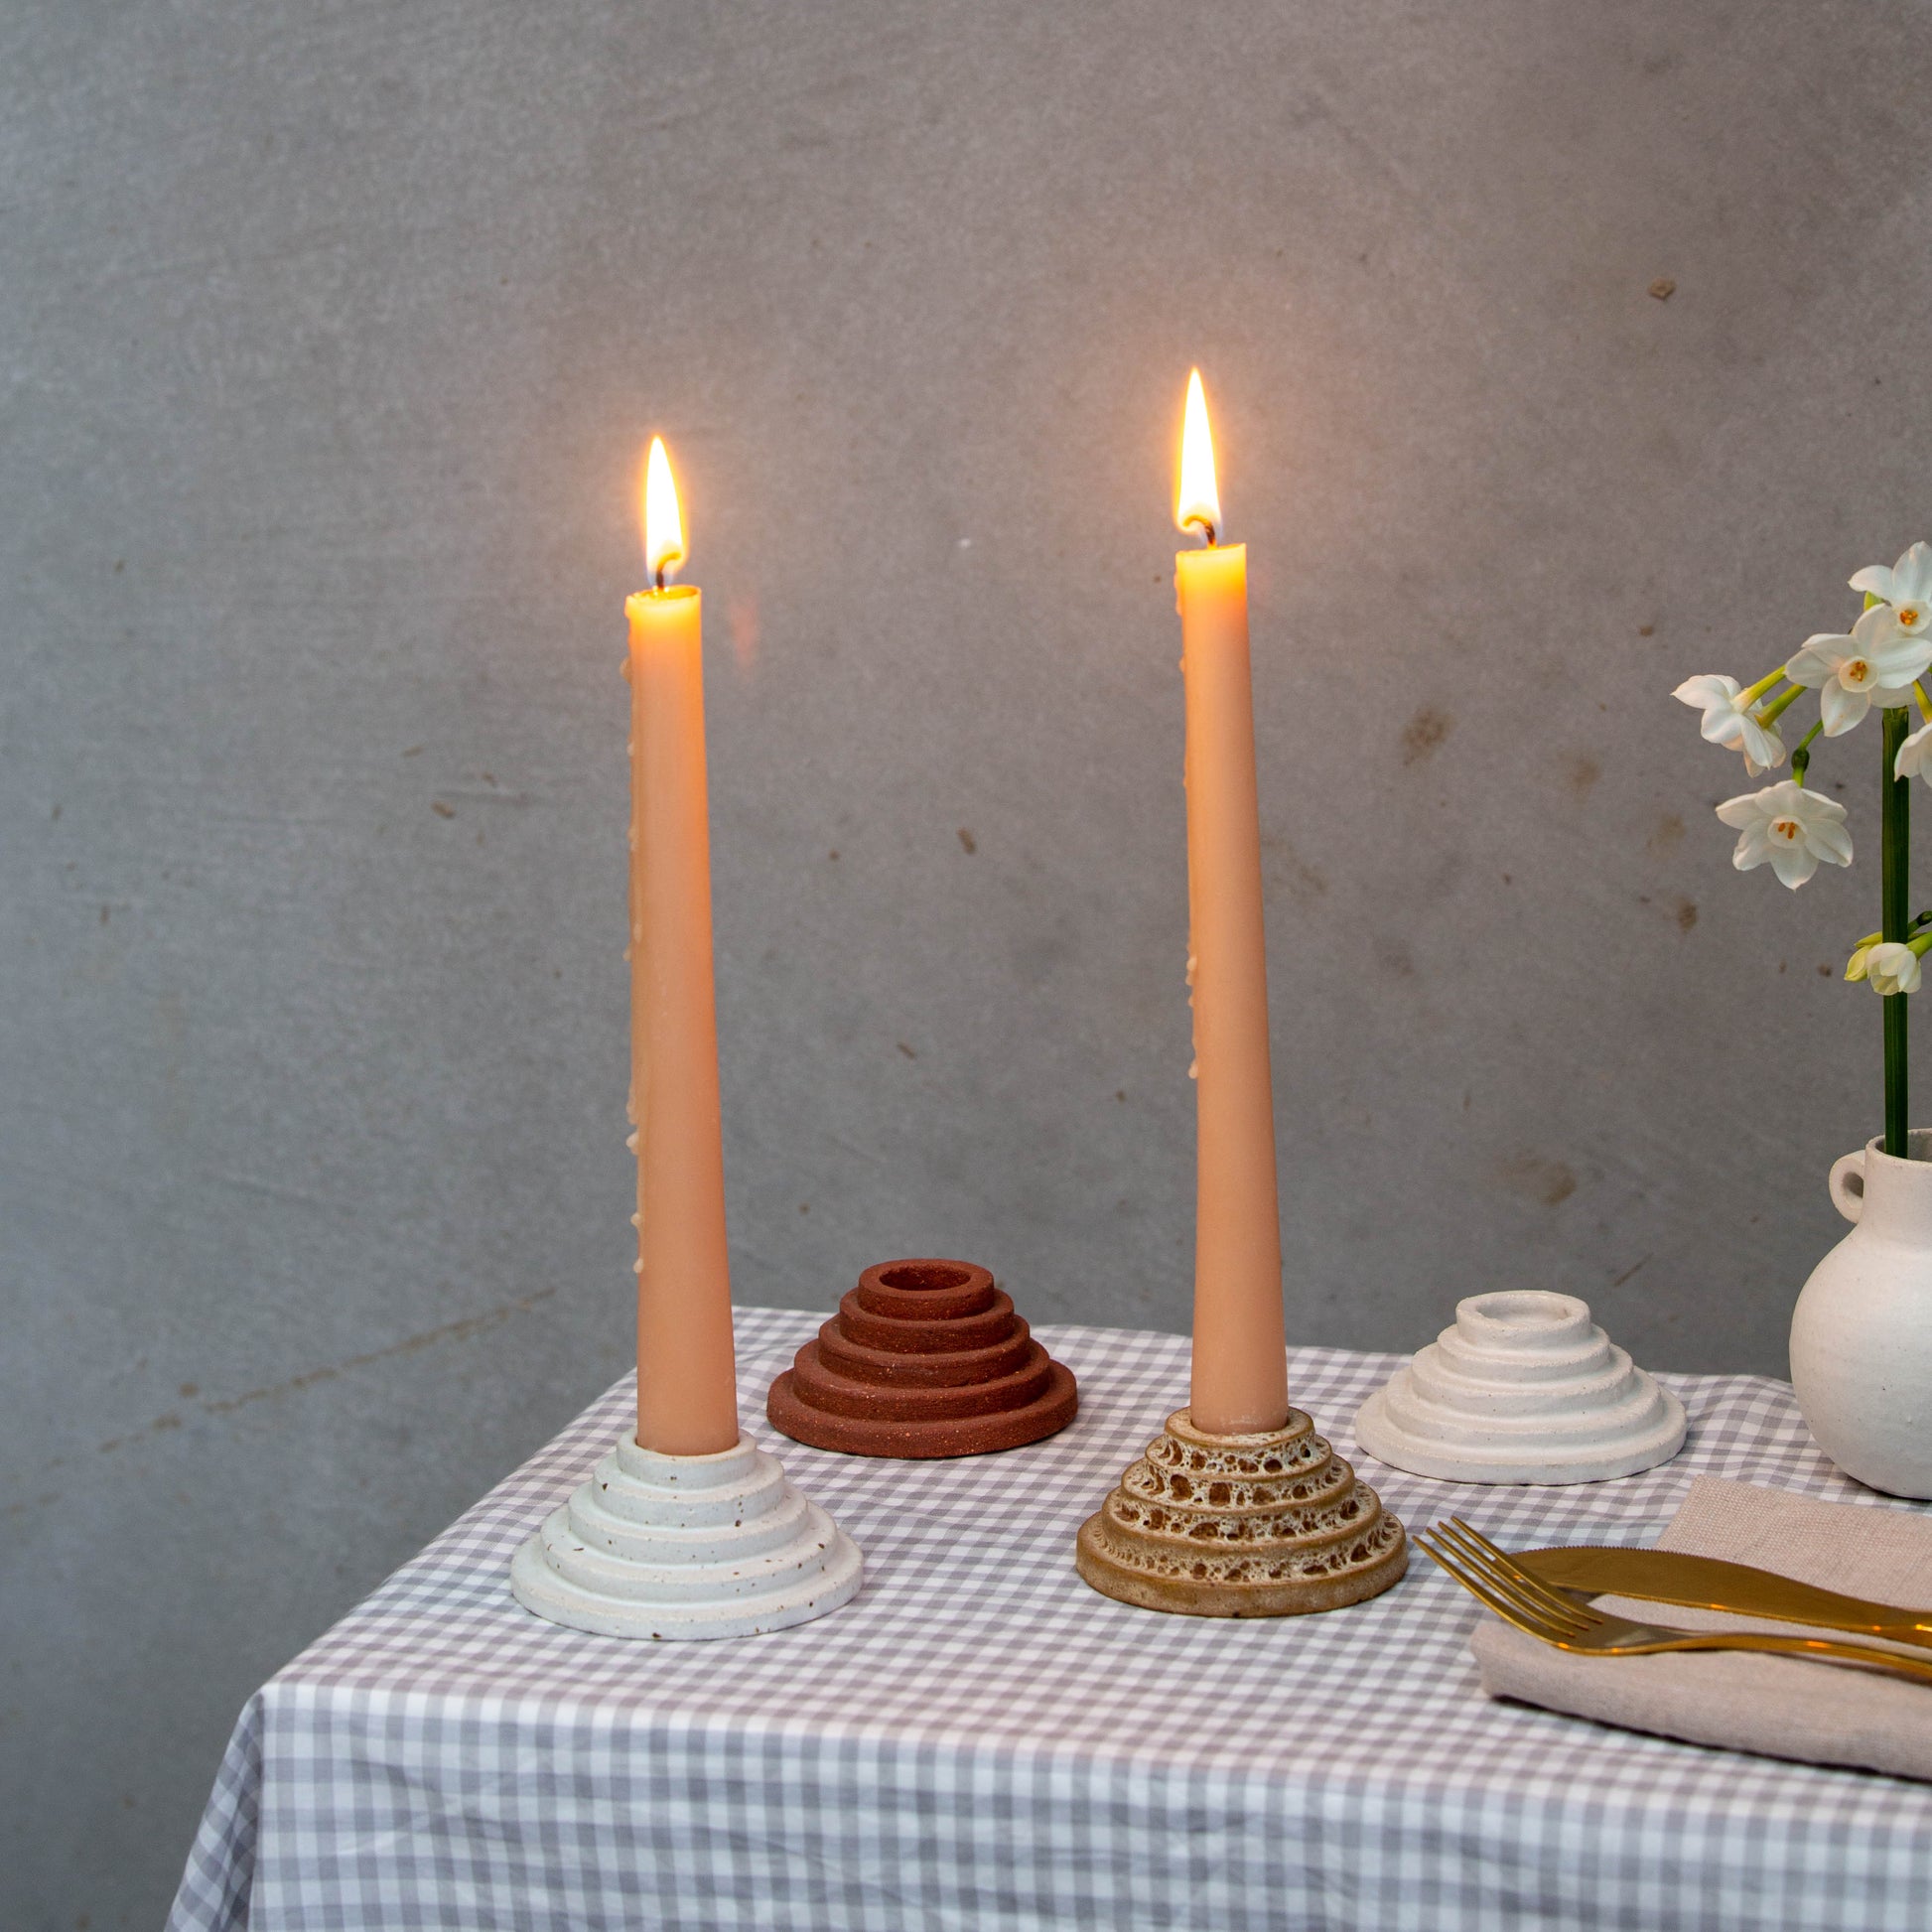 A circular ceramic candle holder featuring steps leading up to the candle. These candle holders have peach candles burning and are sitting on a gingham tablecloth with a vase and flowers, and gold cutlery on a linen napkin.